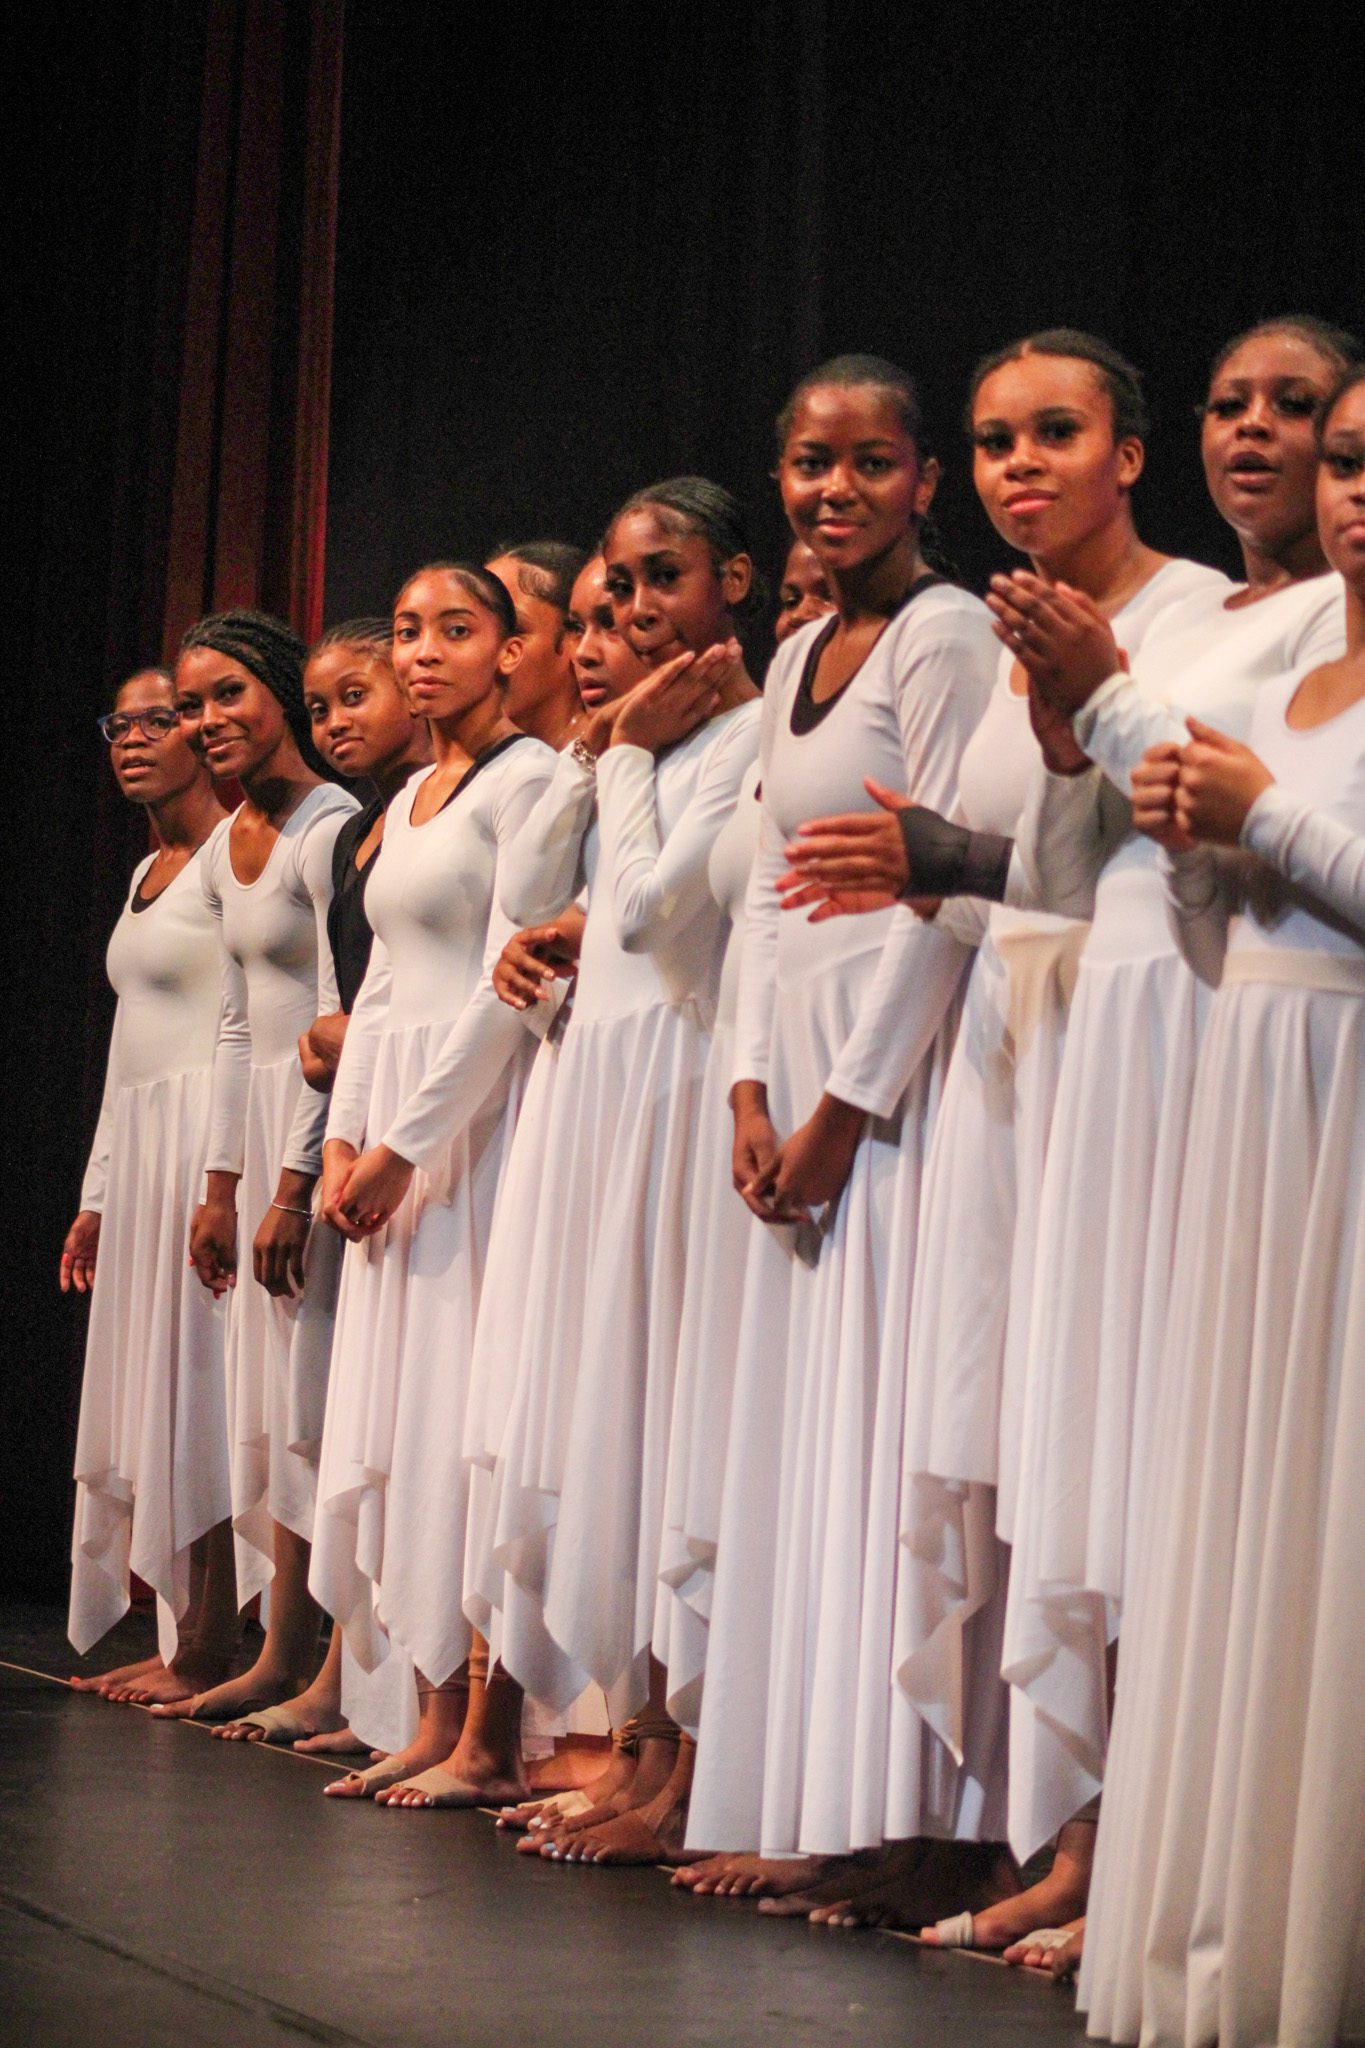 The dancers are all lined up in their dance uniform. They are all wearing a white ballet-like dresses. Some are clapping, while others are staring at the audience.